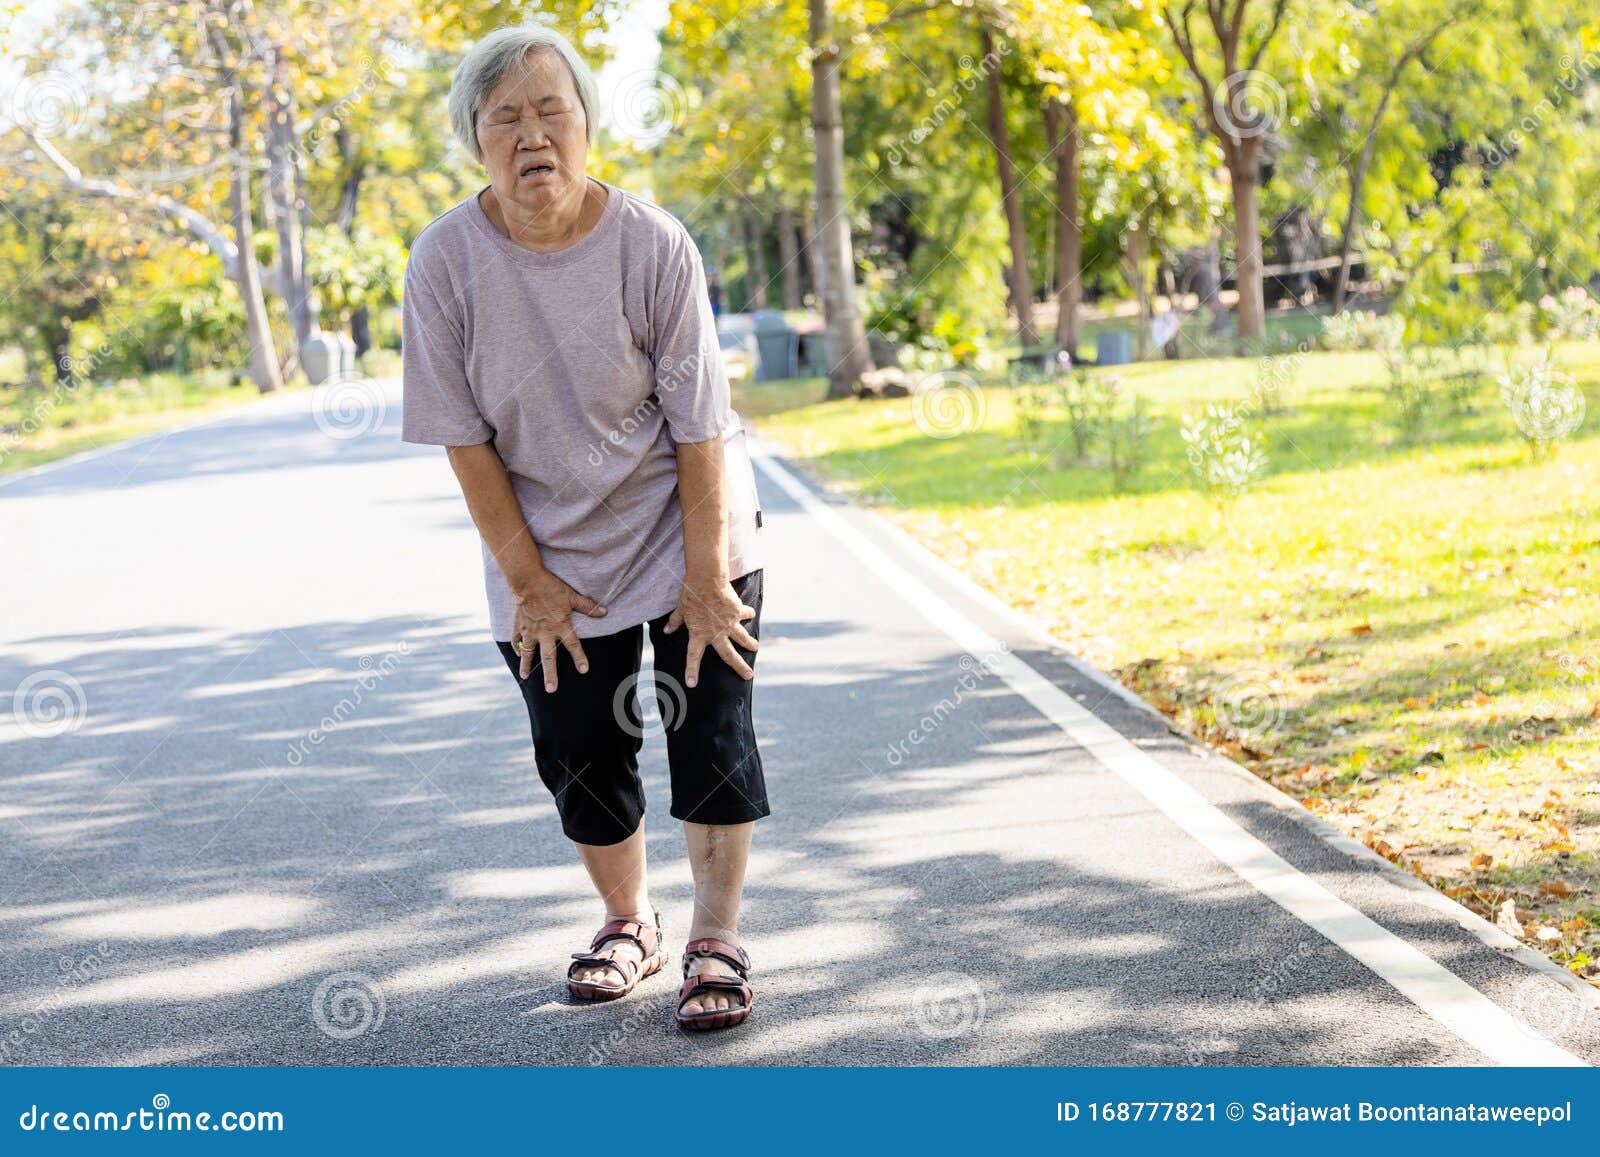 asian senior woman is extremely tired while walking at park, body is weak feeling tired easily due to lack of energy and donÃ¢â¬â¢t